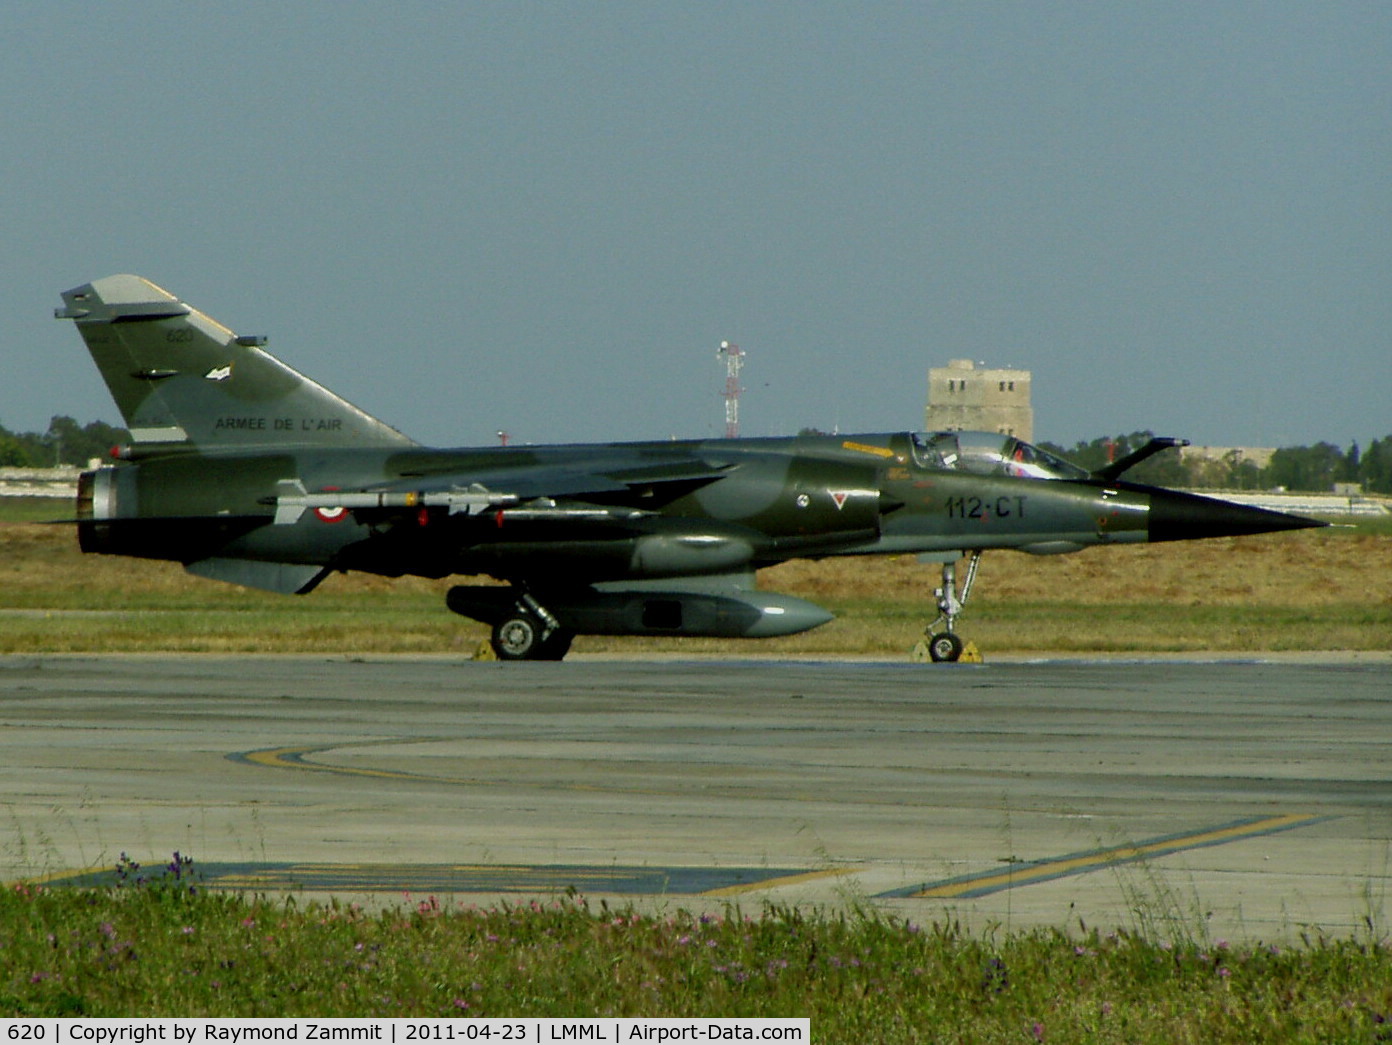 620, Dassault Mirage F.1CR C/N 620, Dassault Mirage F1CR 620/112-CT French Air Force